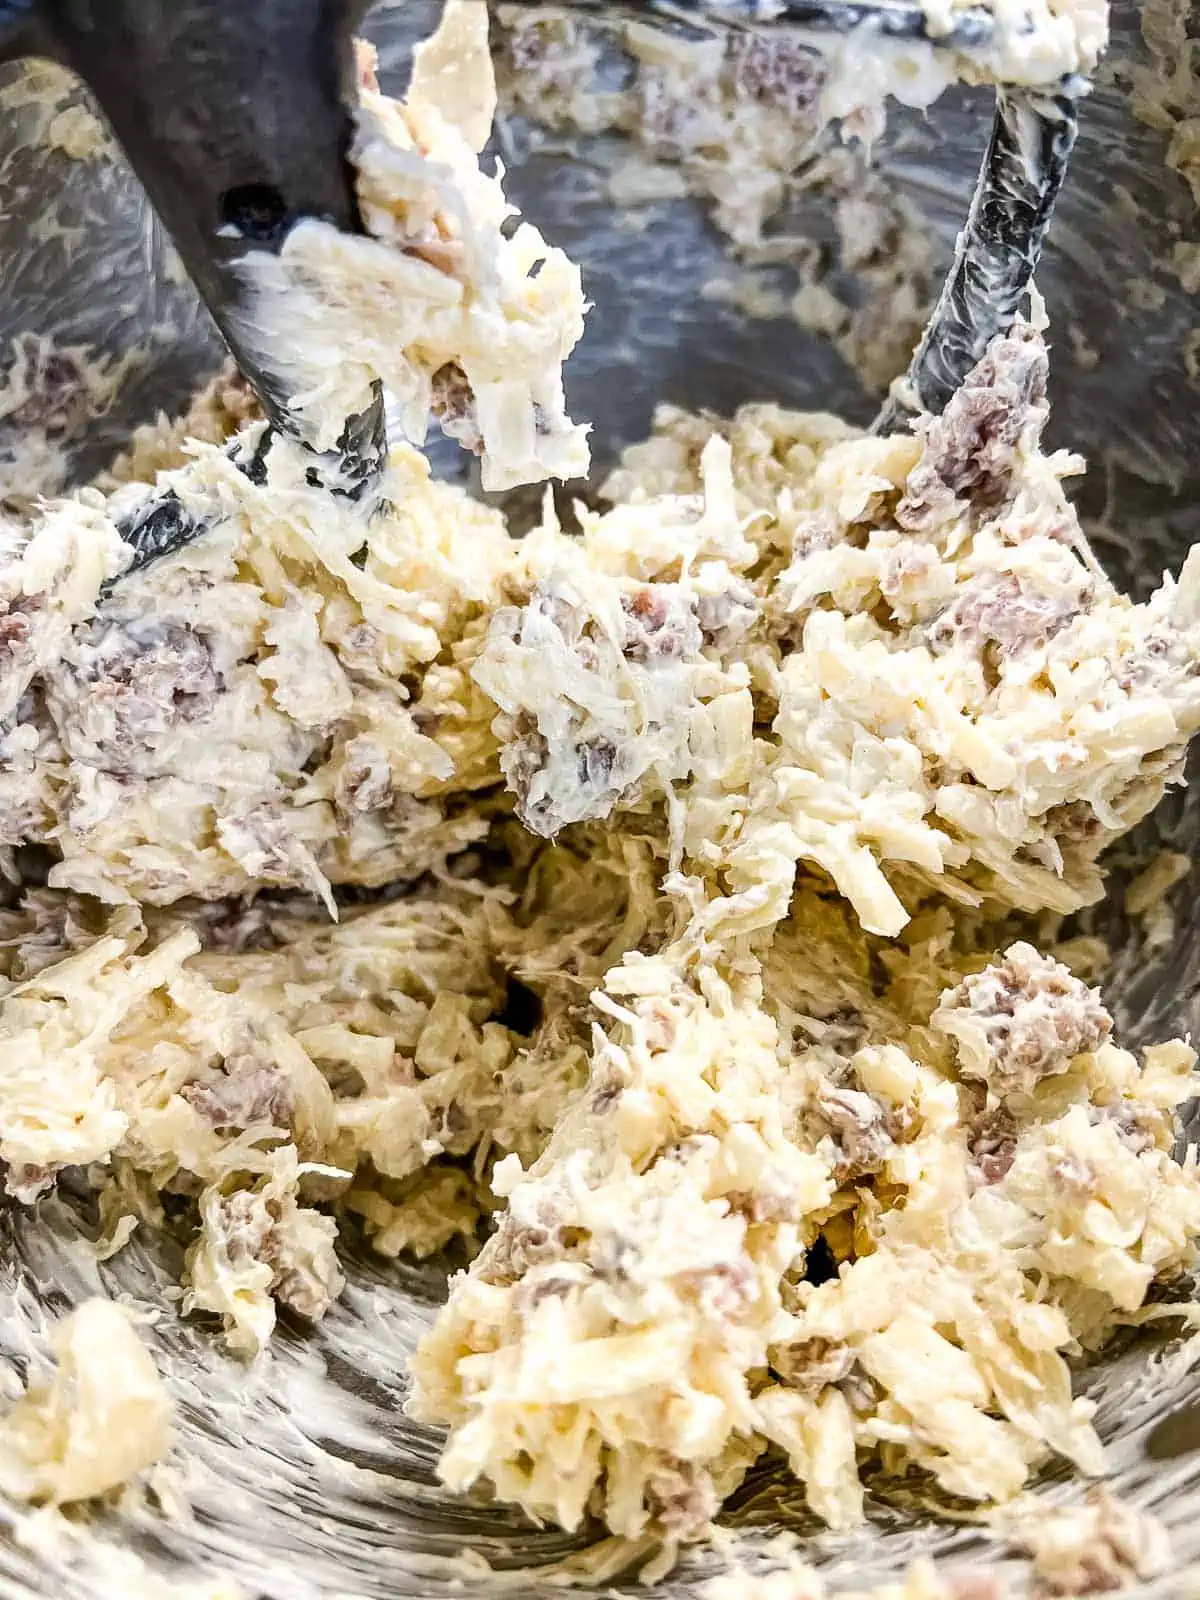 Sausage mixed into the cheese and sauerkraut mixture.